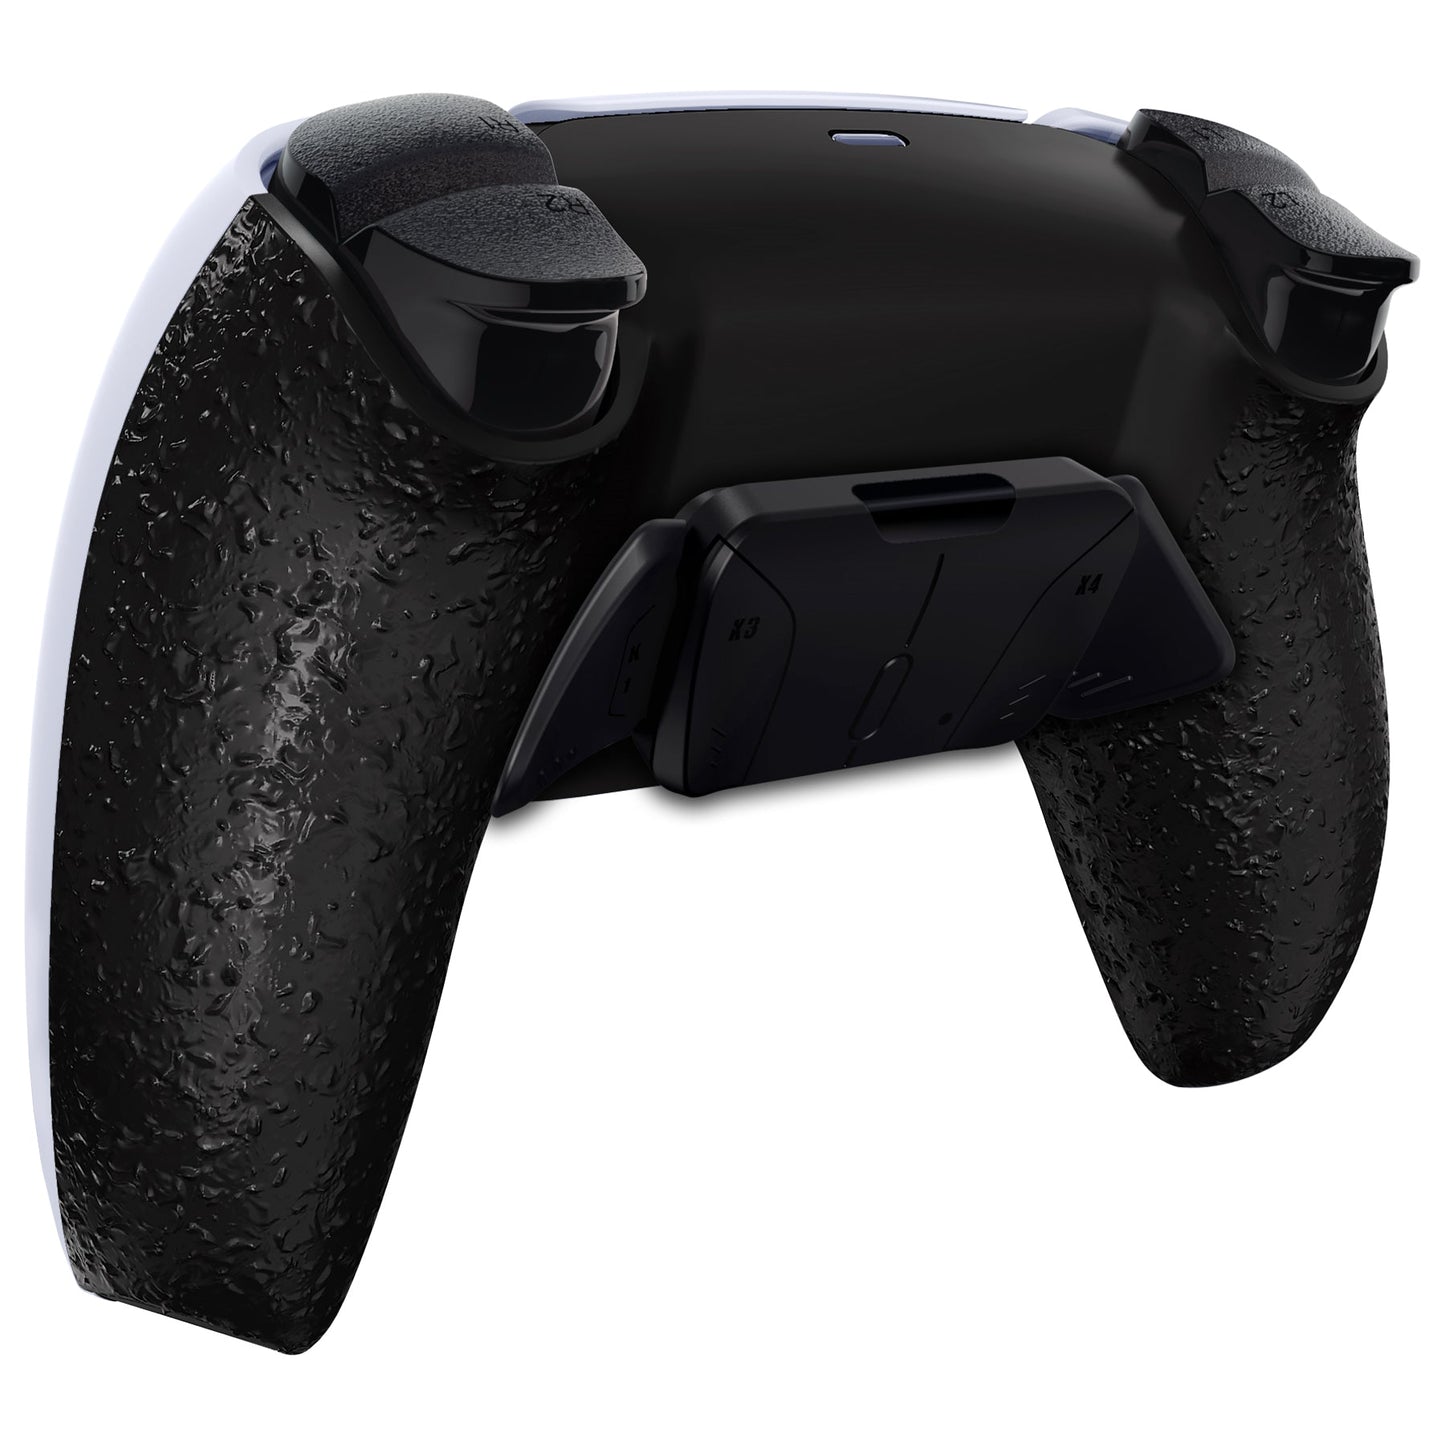 Ps5 Controller BDM 020 Extreme Rate Rise 4 Rot SCUF, € 129,- (9800